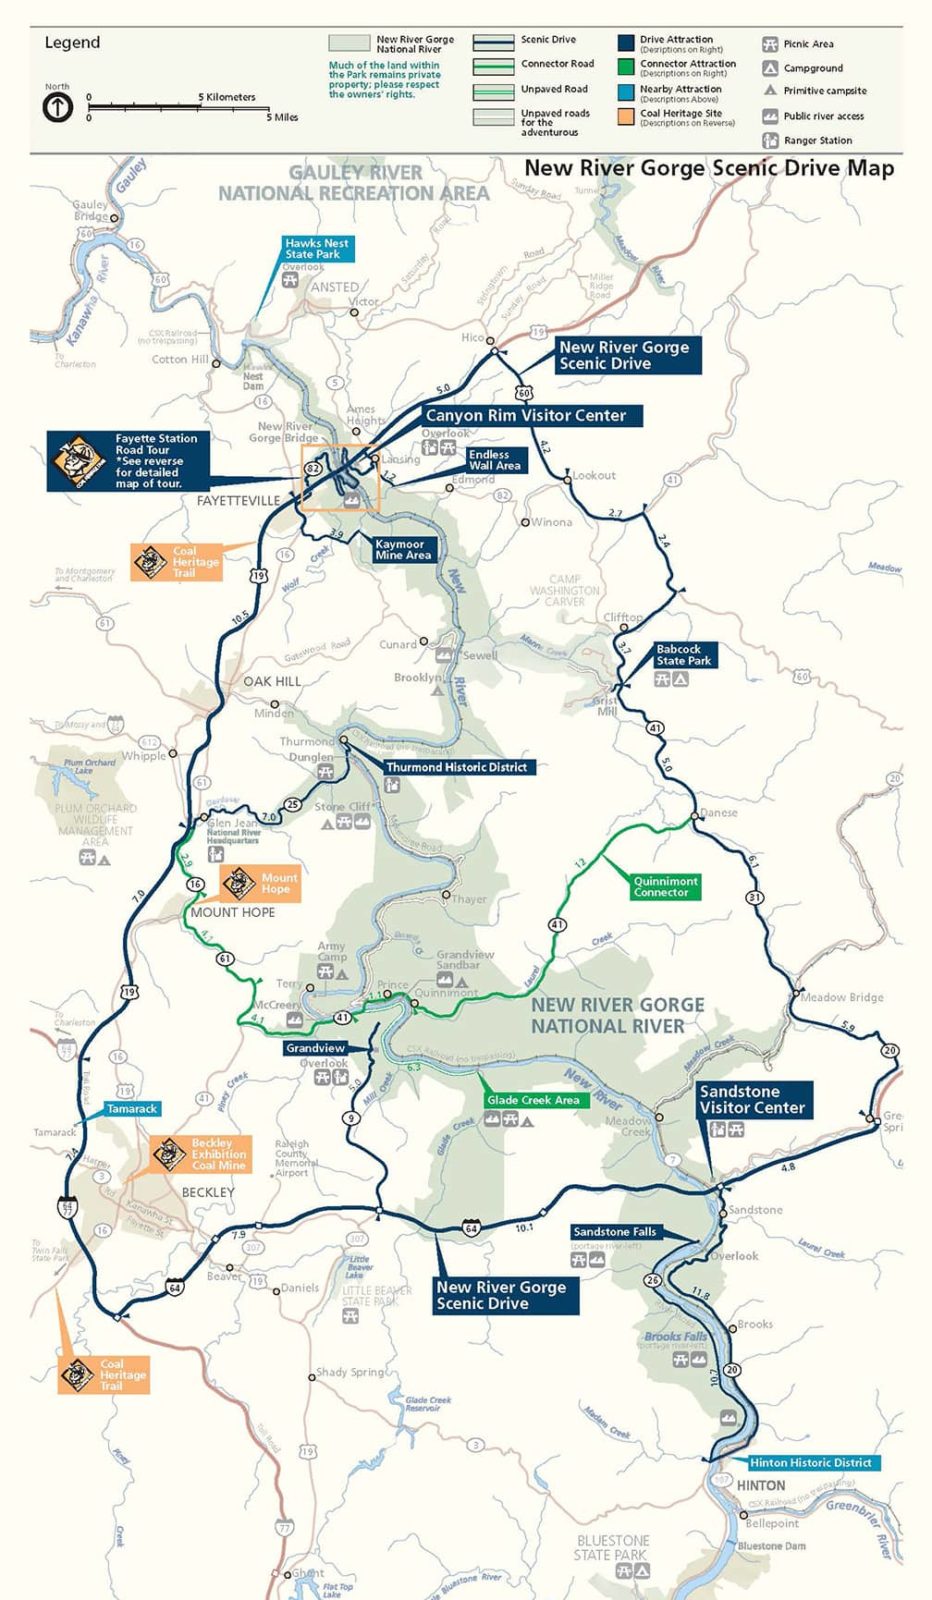 Map of the New River Gorge Scenic Drive